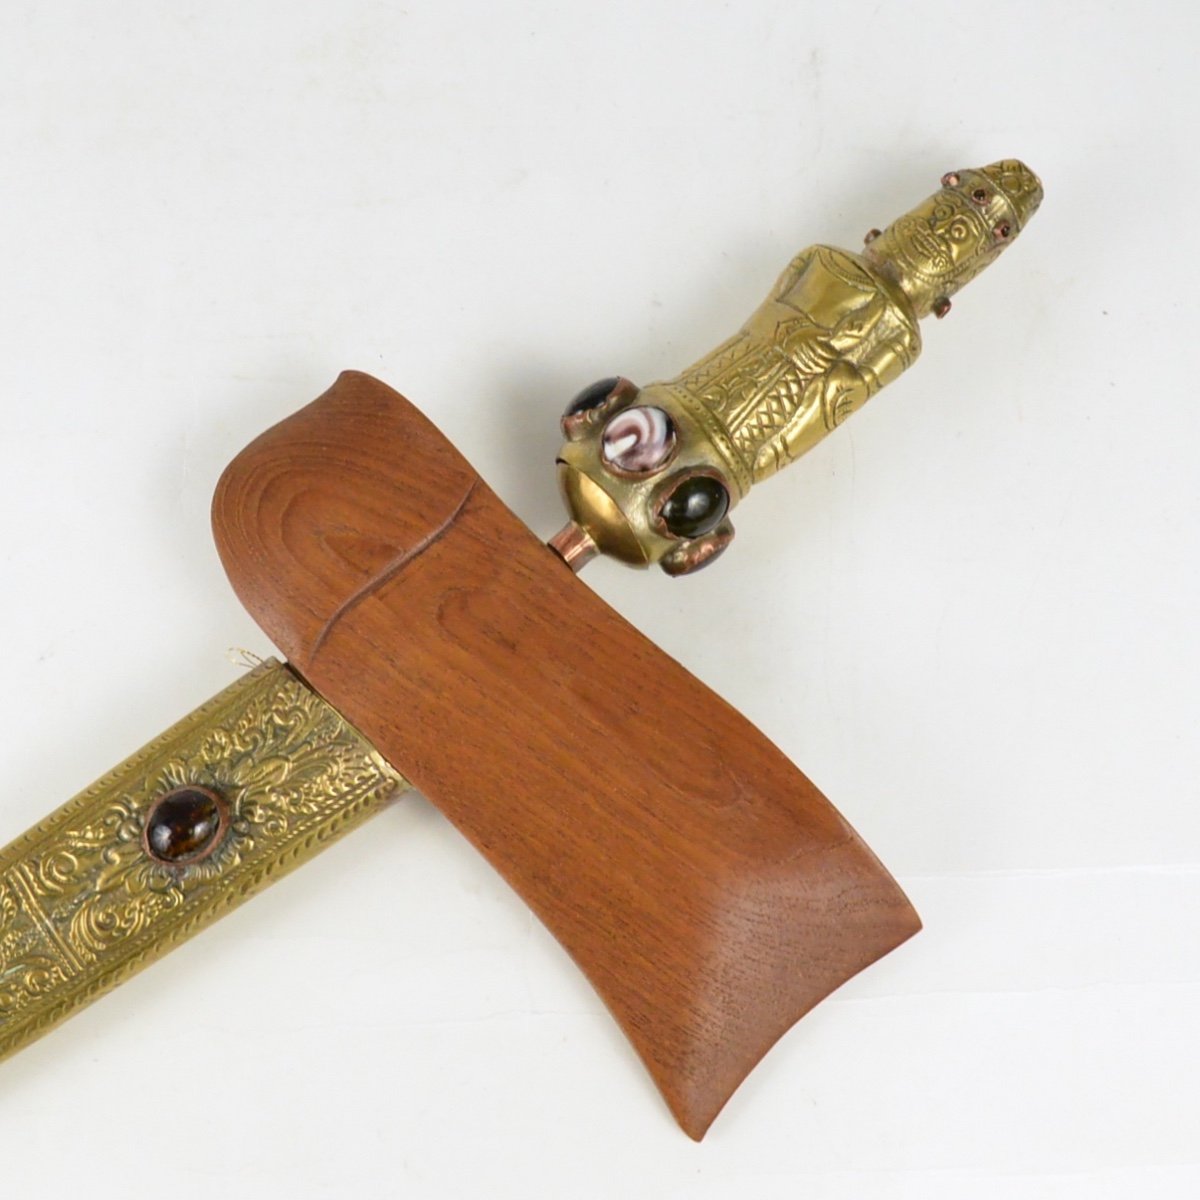 Indonesian Kriss And Its Scabbard Pommel In The Shape Of A Character Copper And Stones